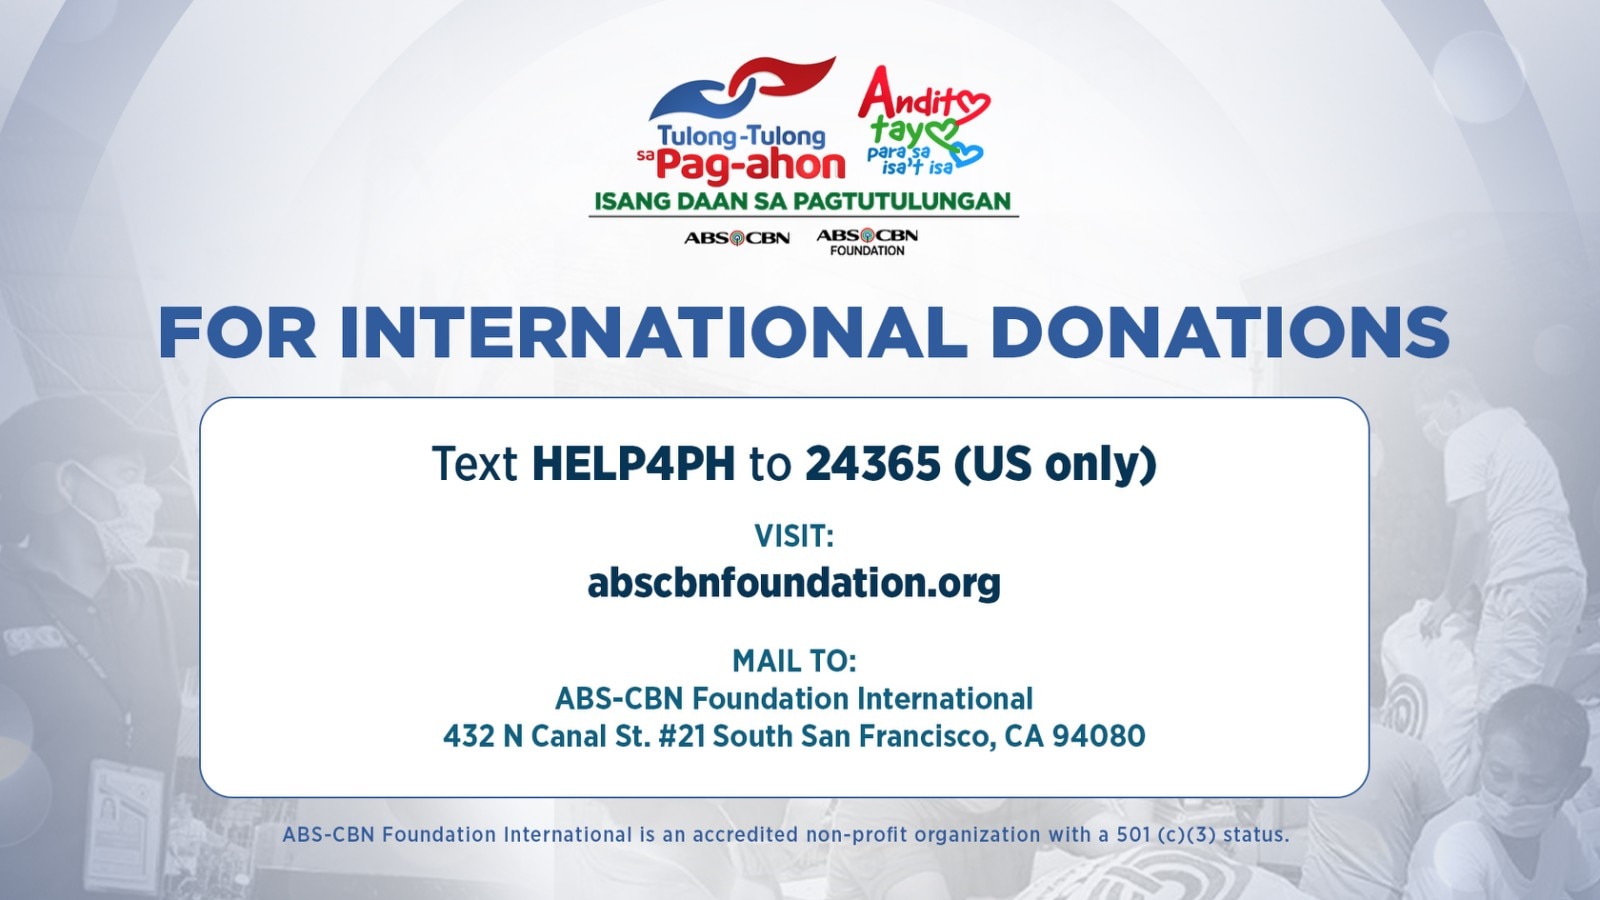 For international donations